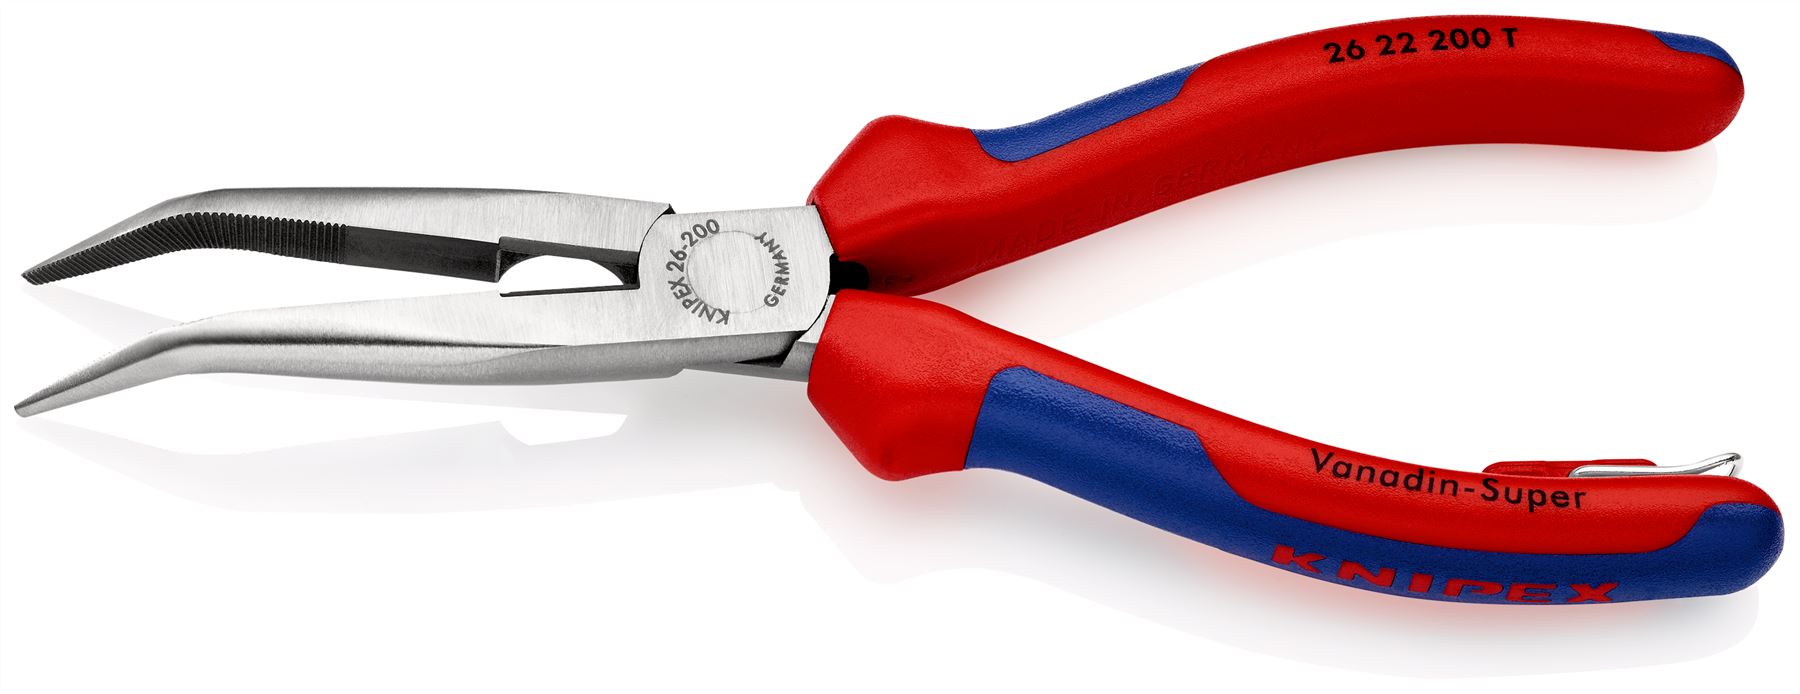 Knipex Snipe Nose Side Cutting Pliers 40° Bend 200mm Multi Component Grips with Tether Point 26 22 200 T